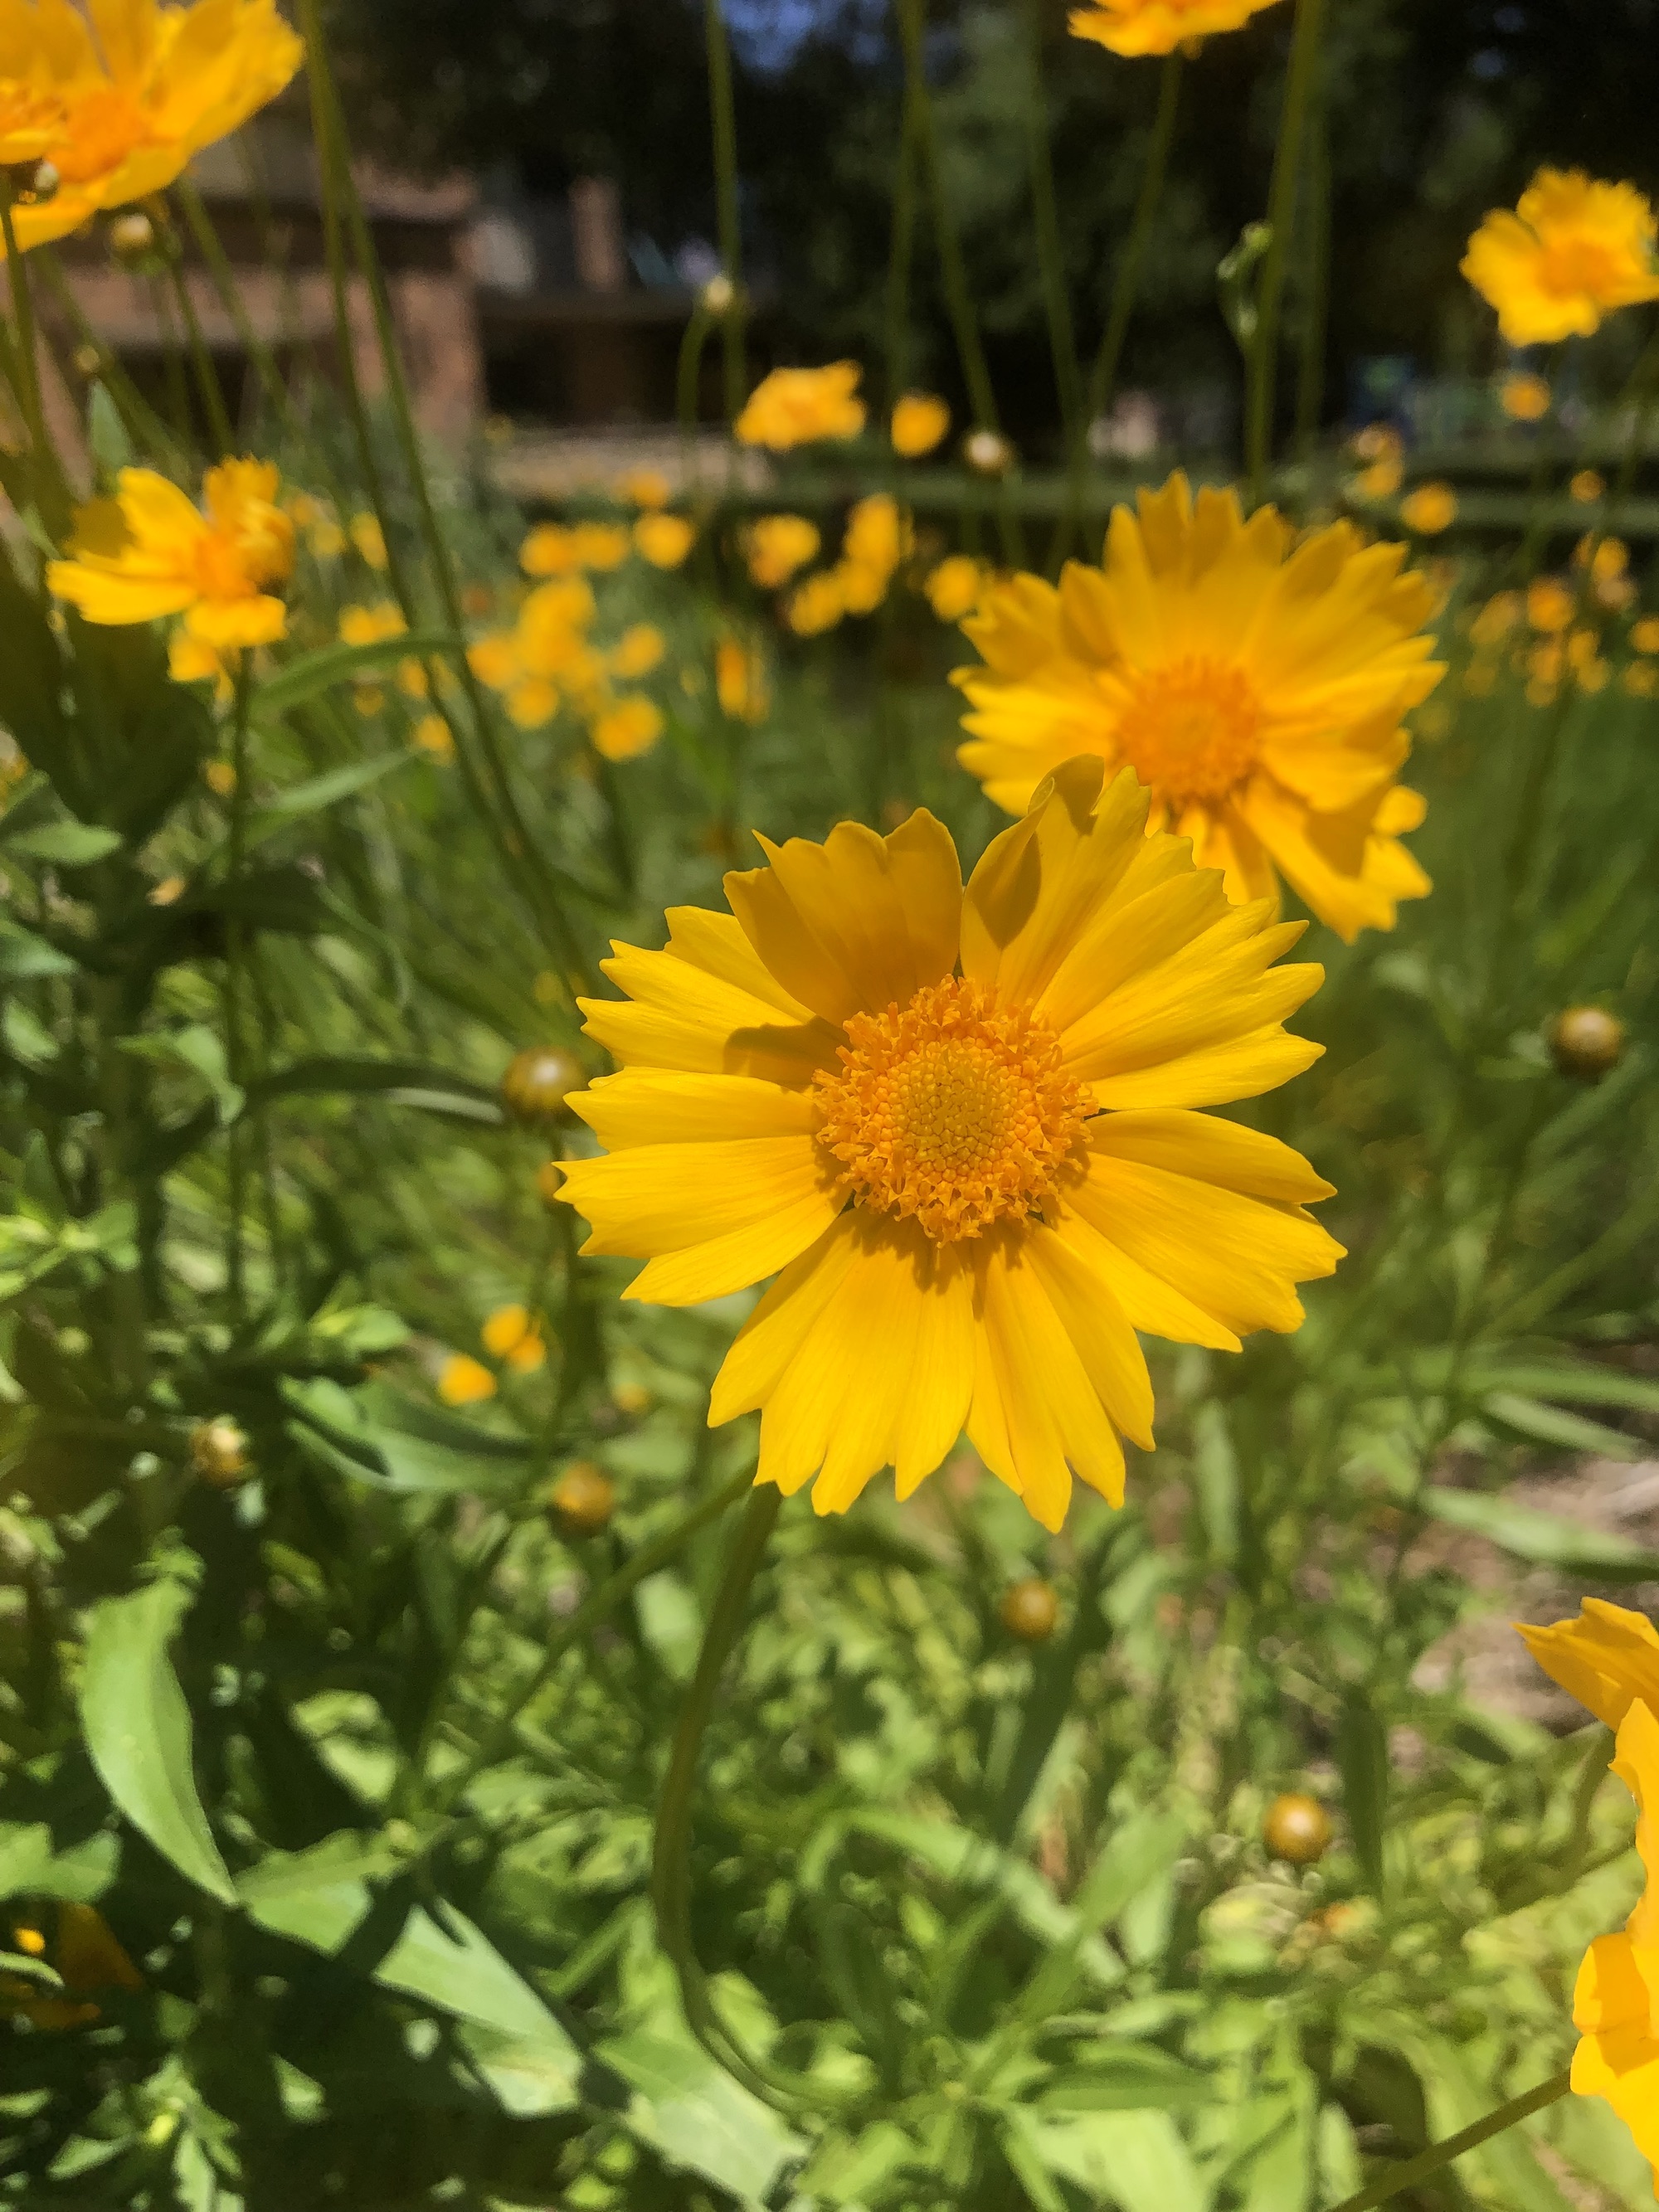 Lance-leaved coreopsis in Wingra Park in Madison, Wisconsin on June 22, 2022.